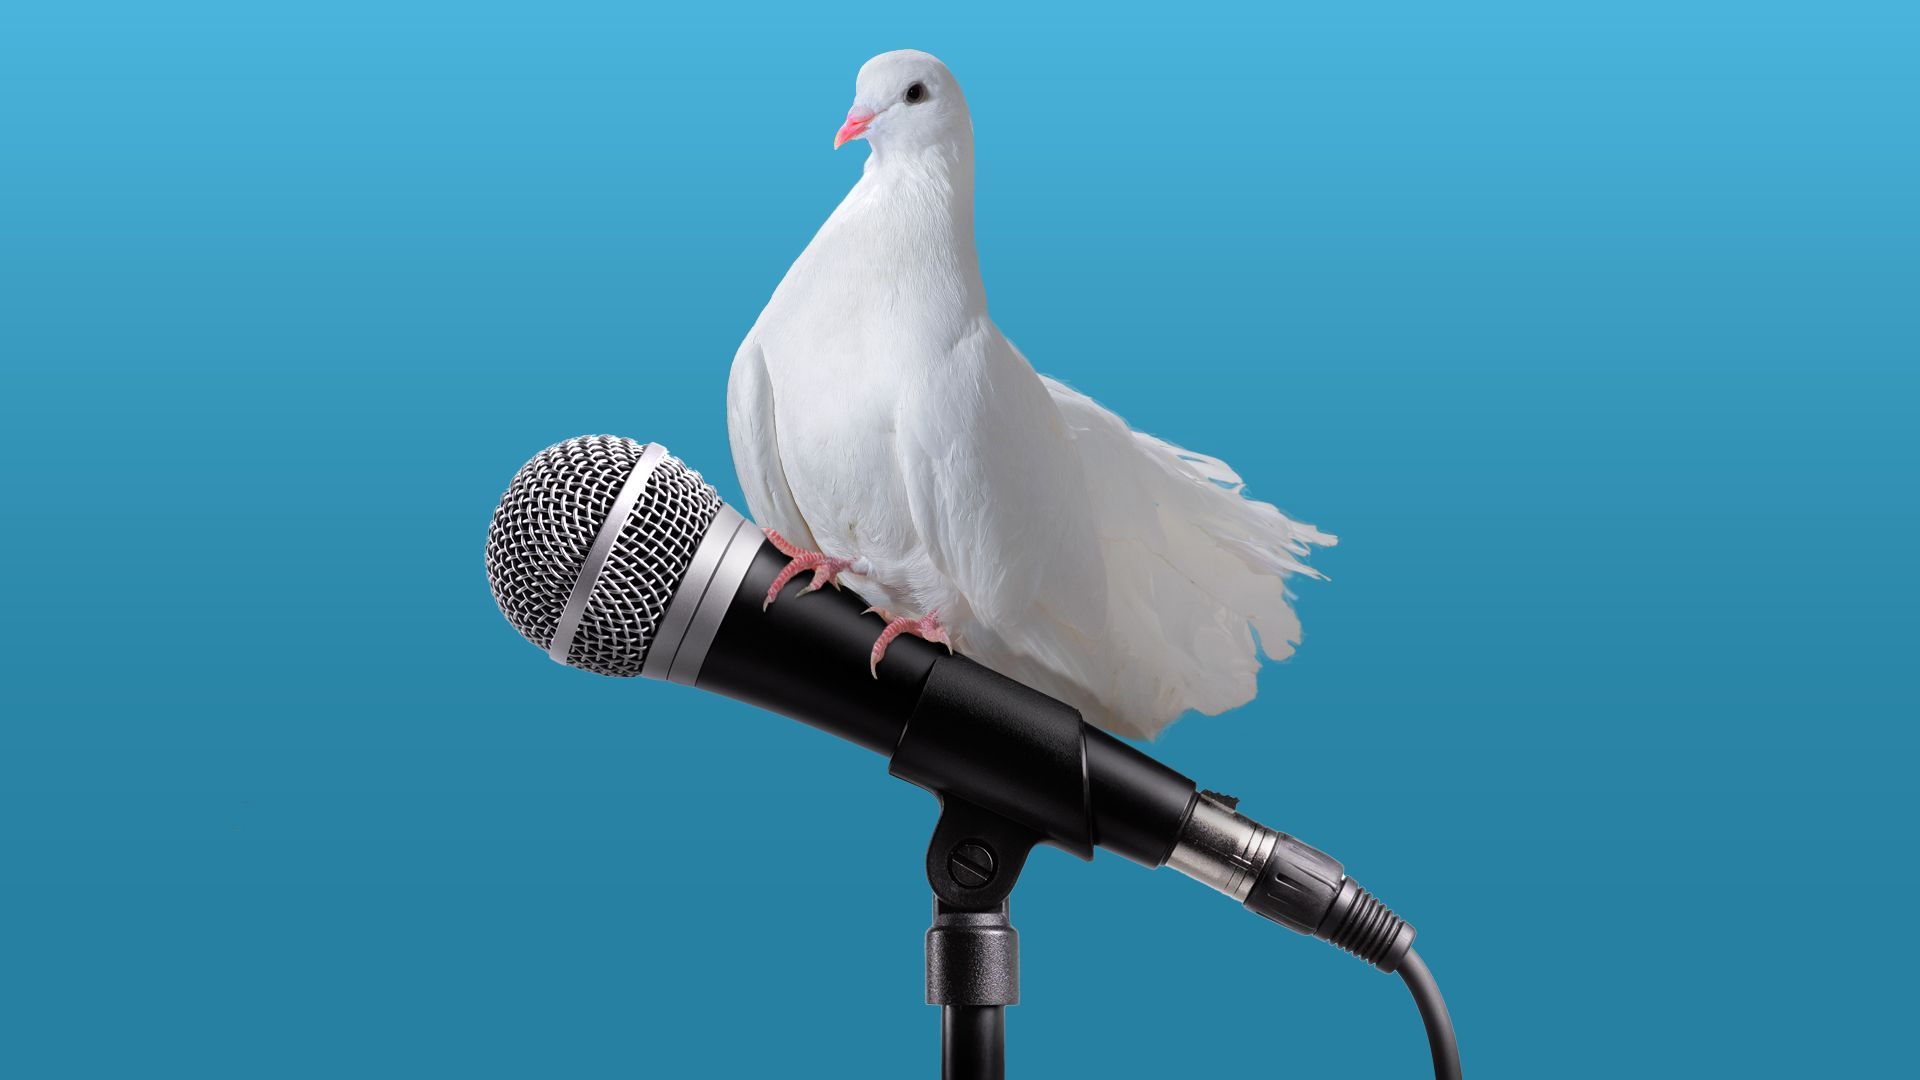 Illustration of a dove sitting on a microphone